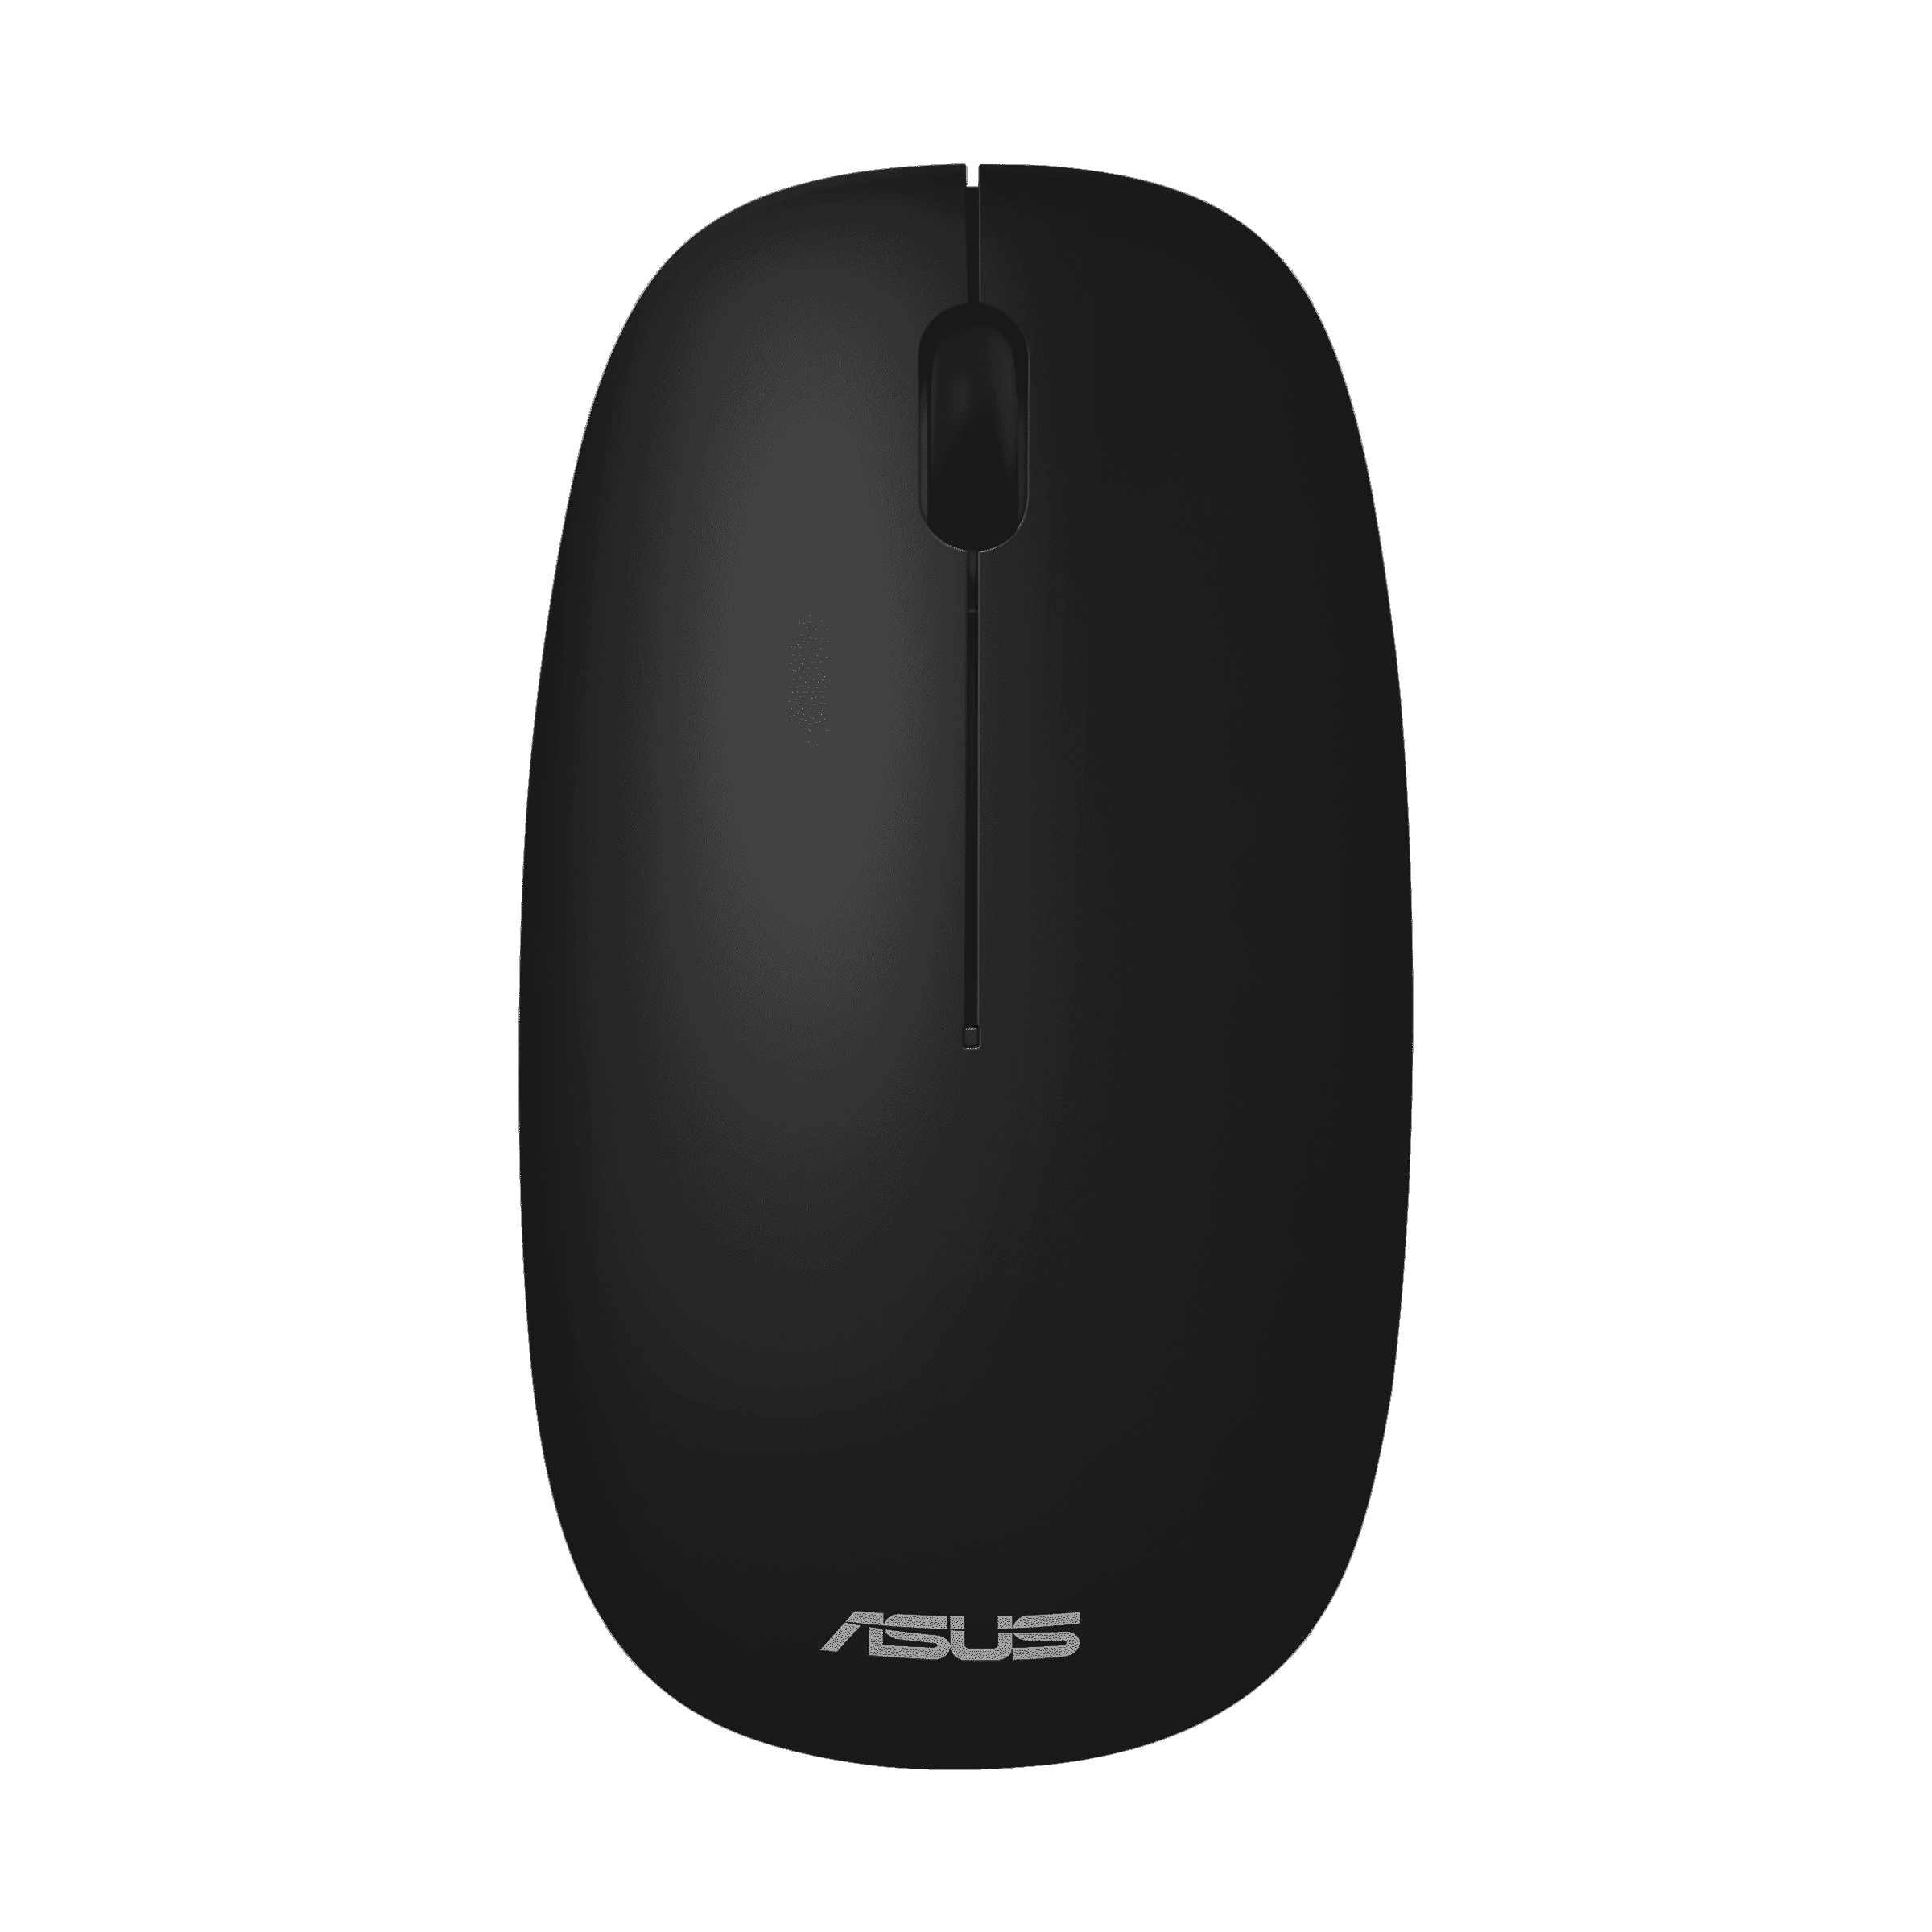 ASUS W5000 Wireless Keyboard and Mouse Set｜Keyboards｜ASUS Global